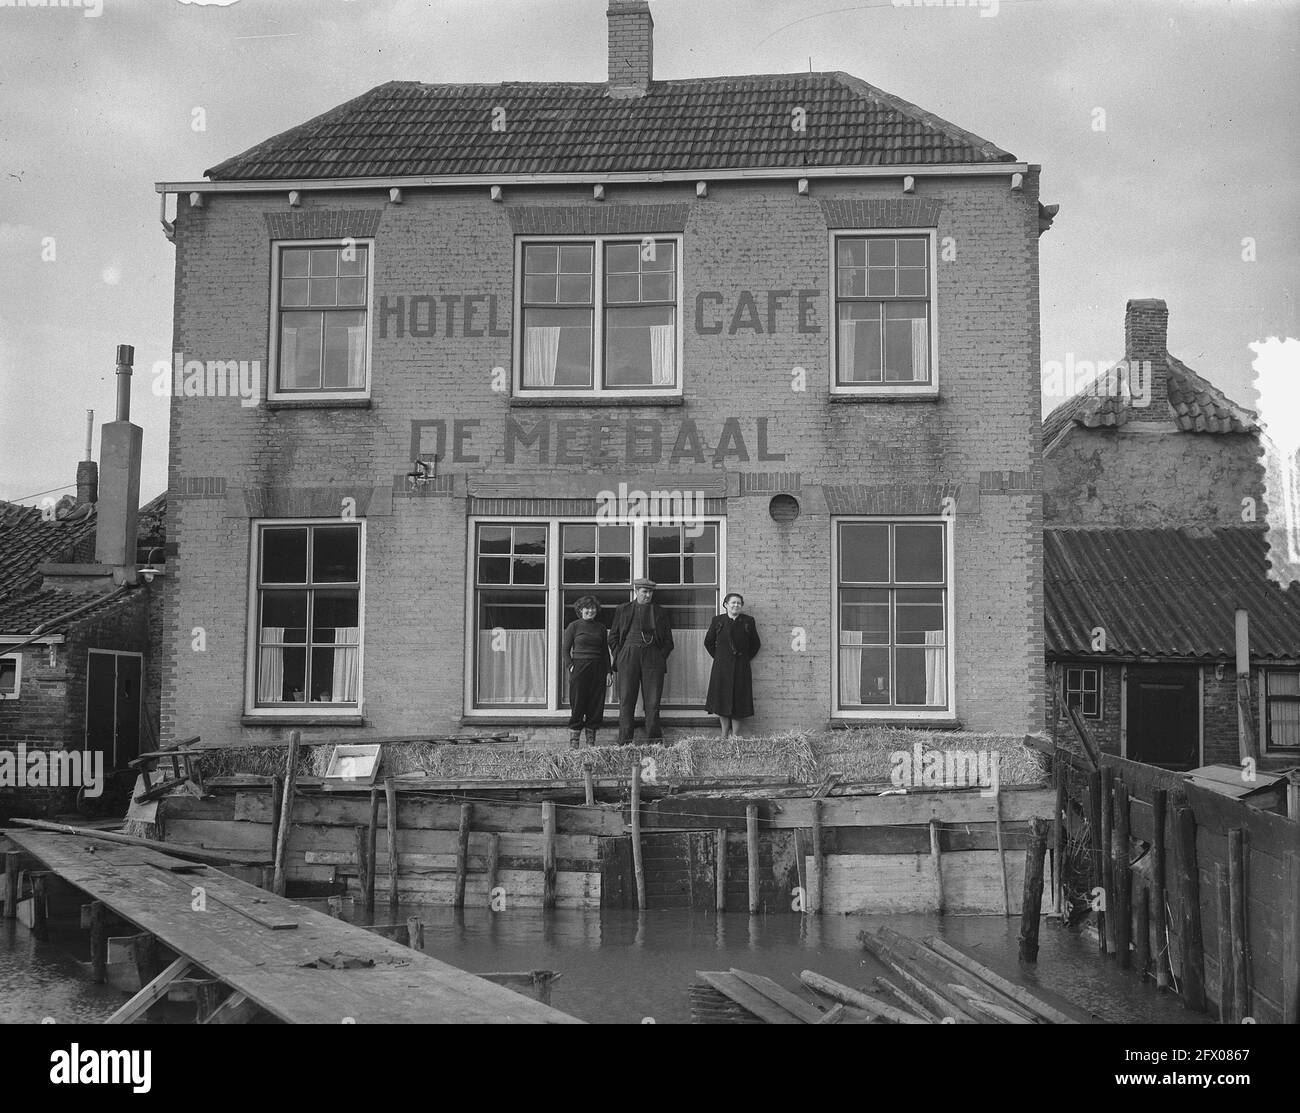 Schouwen Duiveland Nieuwerkerk . Hotel De Meebaal, April 2, 1953, flooding, The Netherlands, 20th century press agency photo, news to remember, documentary, historic photography 1945-1990, visual stories, human history of the Twentieth Century, capturing moments in time Stock Photo